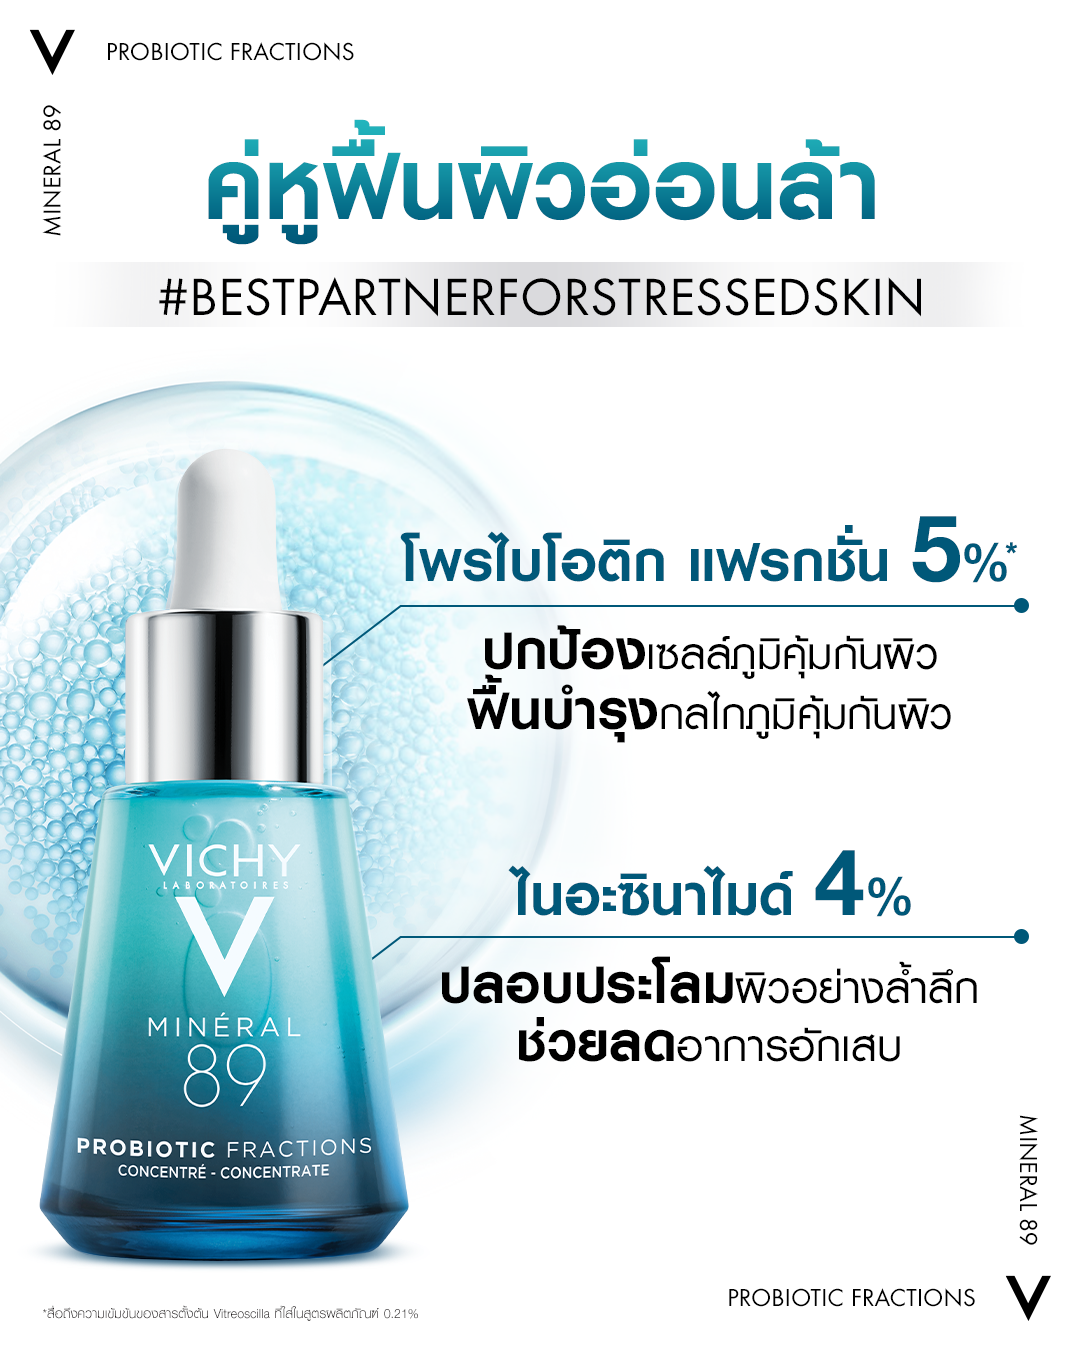 Vichy M89 Probiotic Fractions 30 ml. | Watsons.co.th